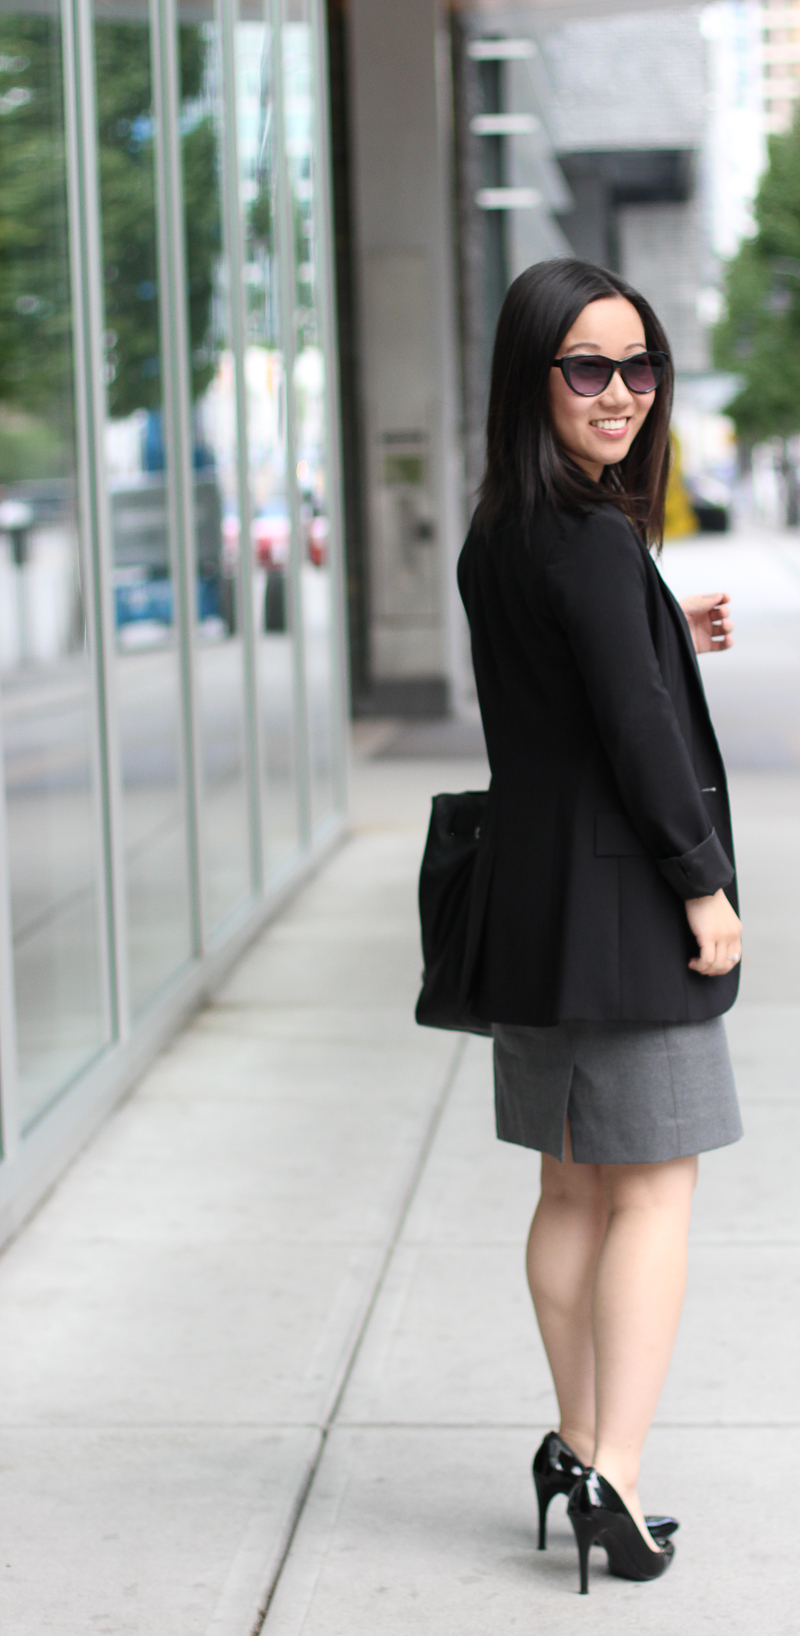 Workwear: The Suit Dress